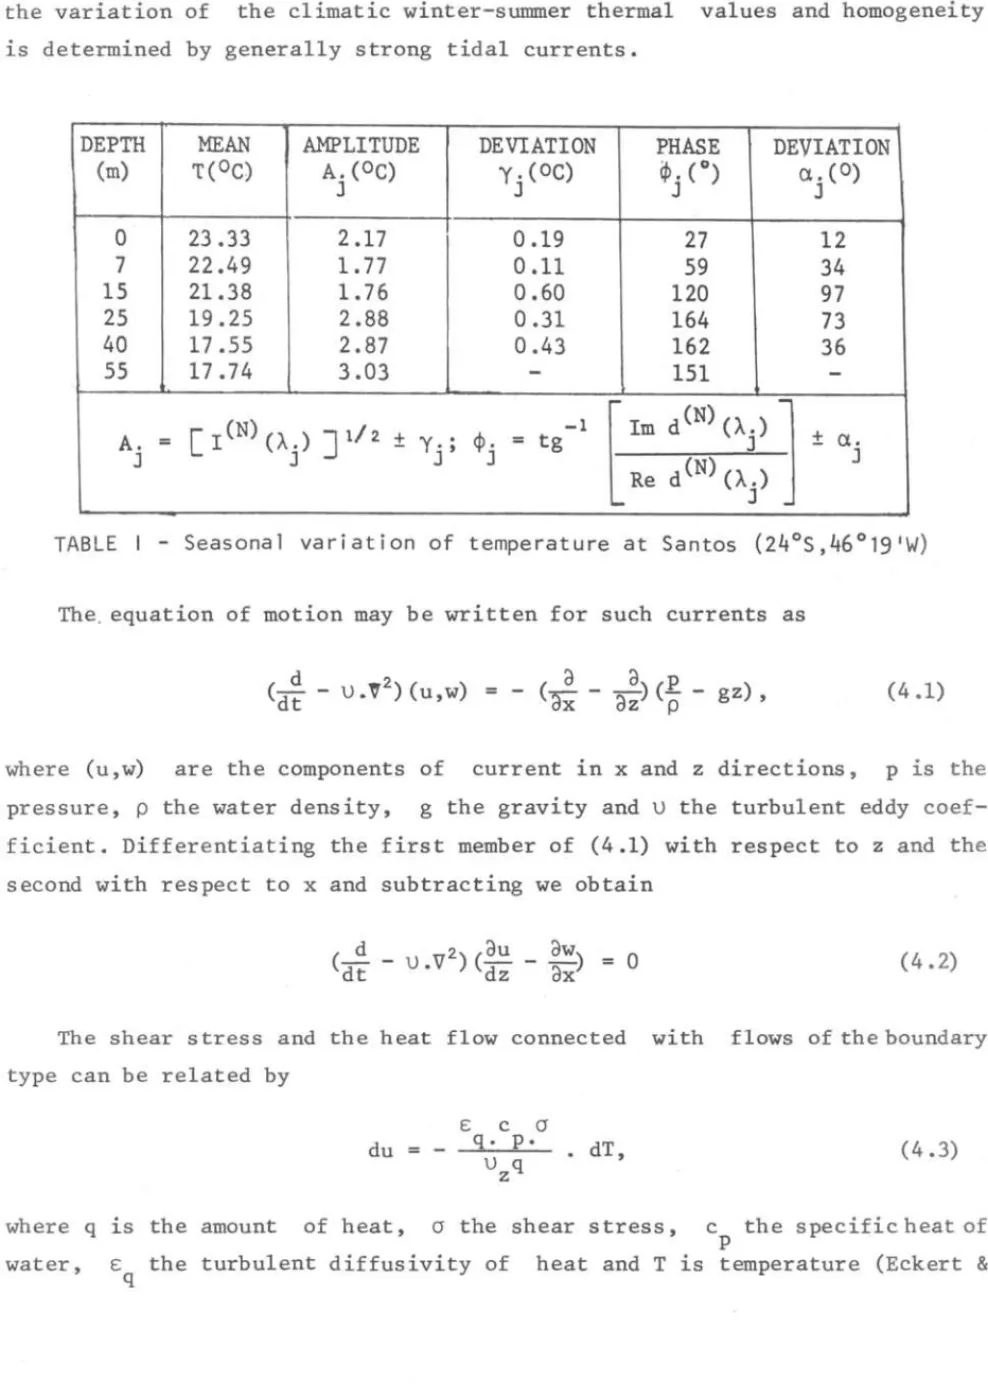 TABLE  I  - Seasonal  variation  of  temperature  at  Santos  (24°S,46°19 I W)  The,  equation  of  motion  may  be  written  for  such  currents  as 